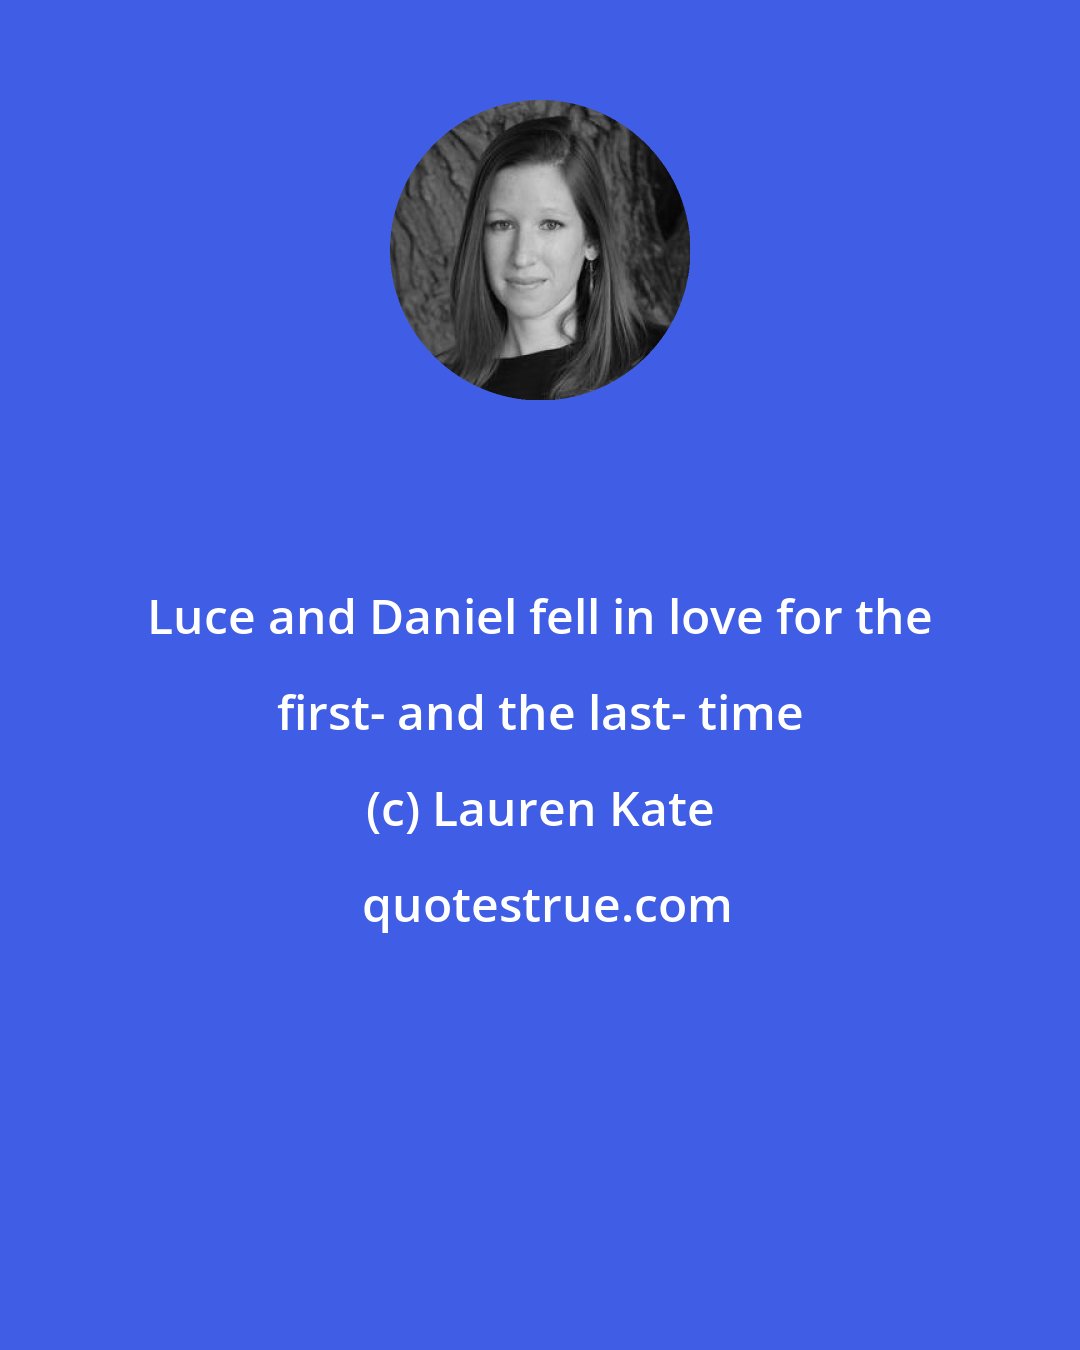 Lauren Kate: Luce and Daniel fell in love for the first- and the last- time